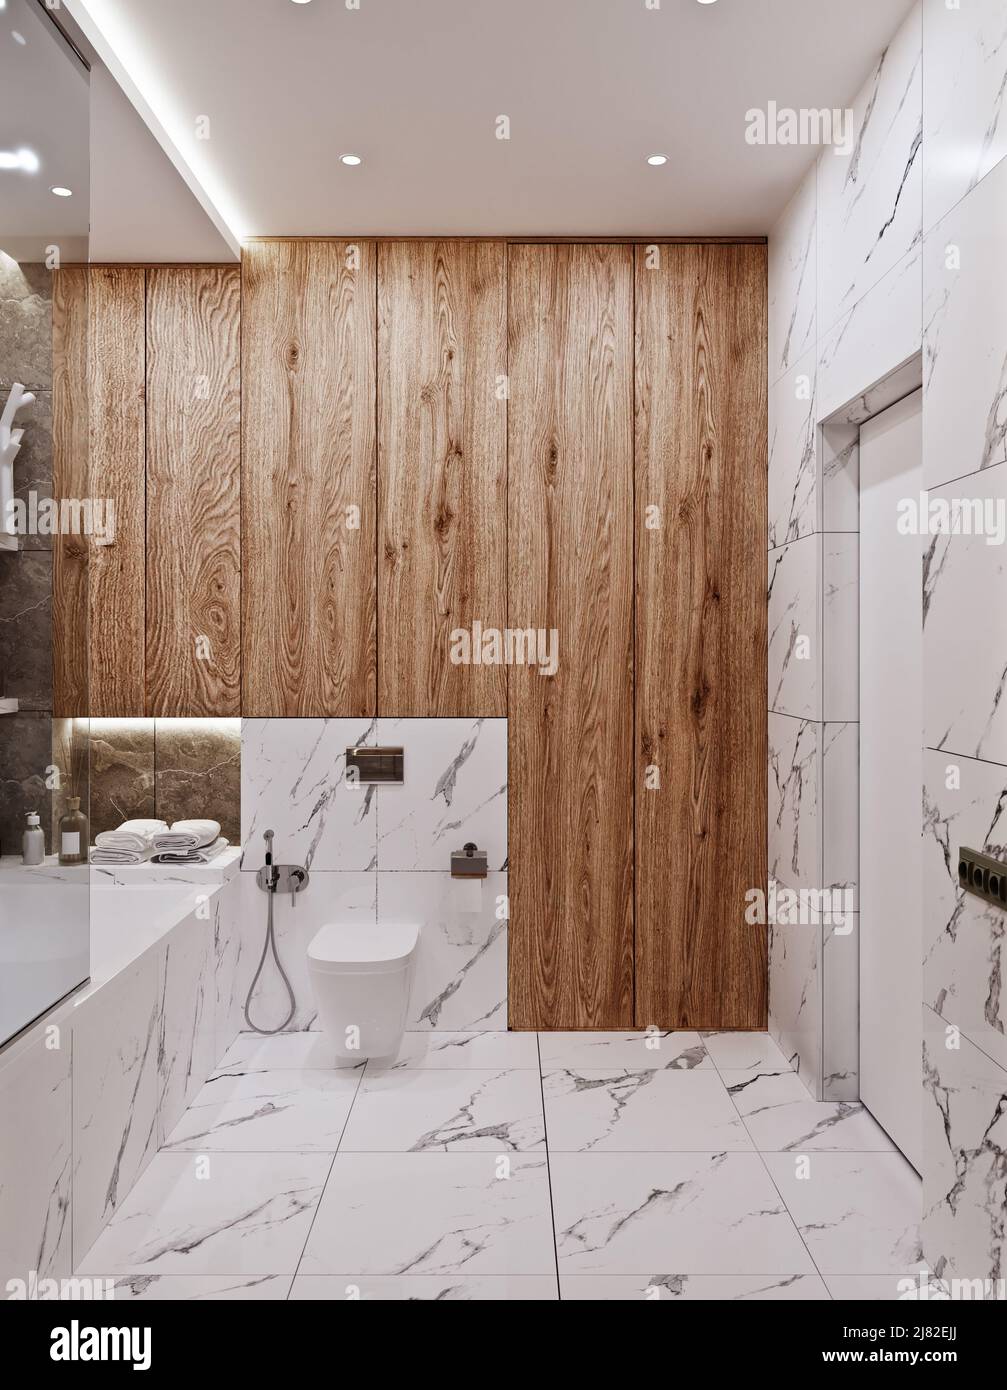 modern bathroom design with tiles marble and wood Stock Photo - Alamy